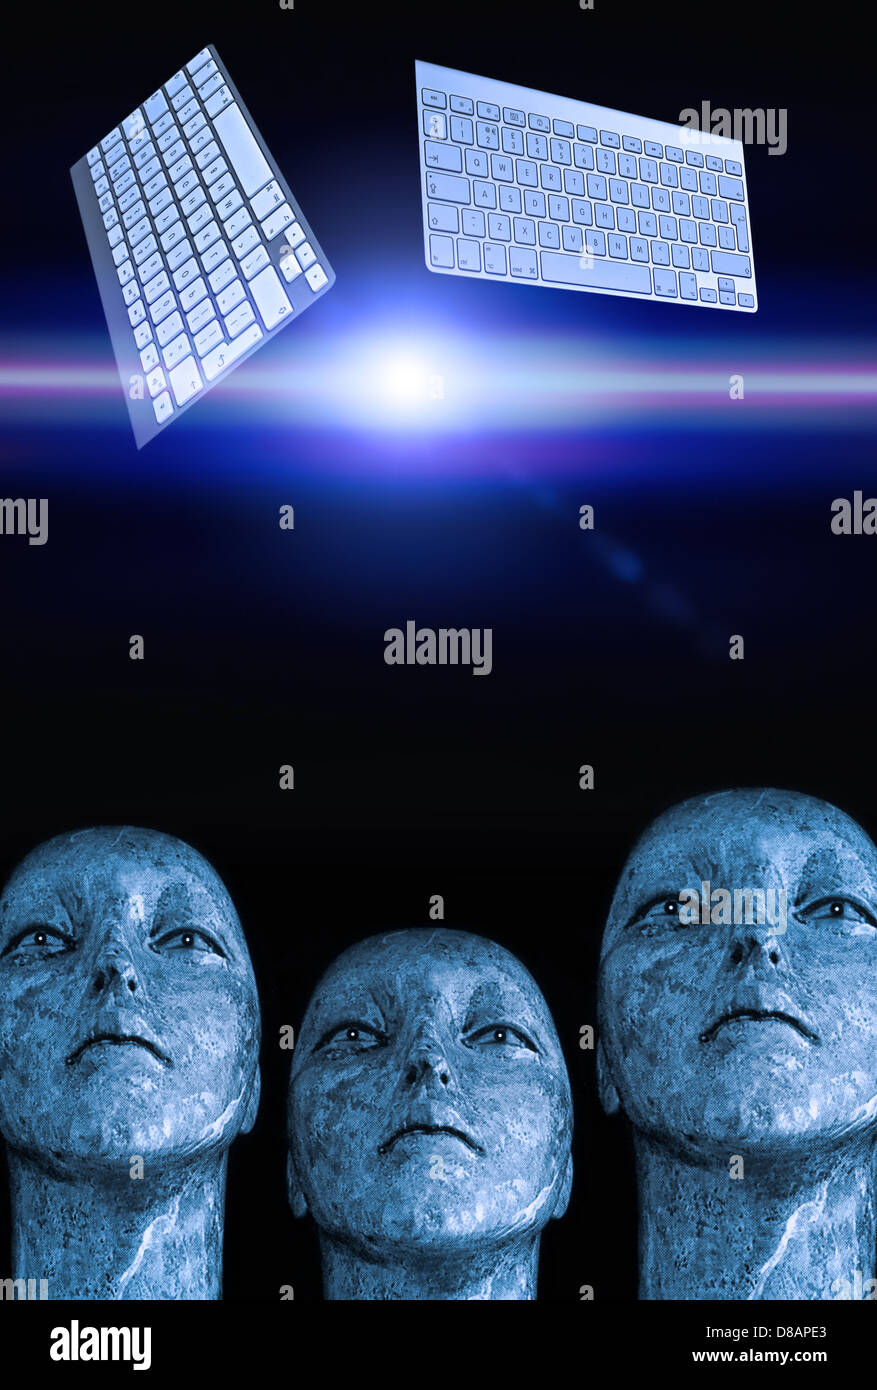 aliens looking into future with keyboards floating in space Stock Photo